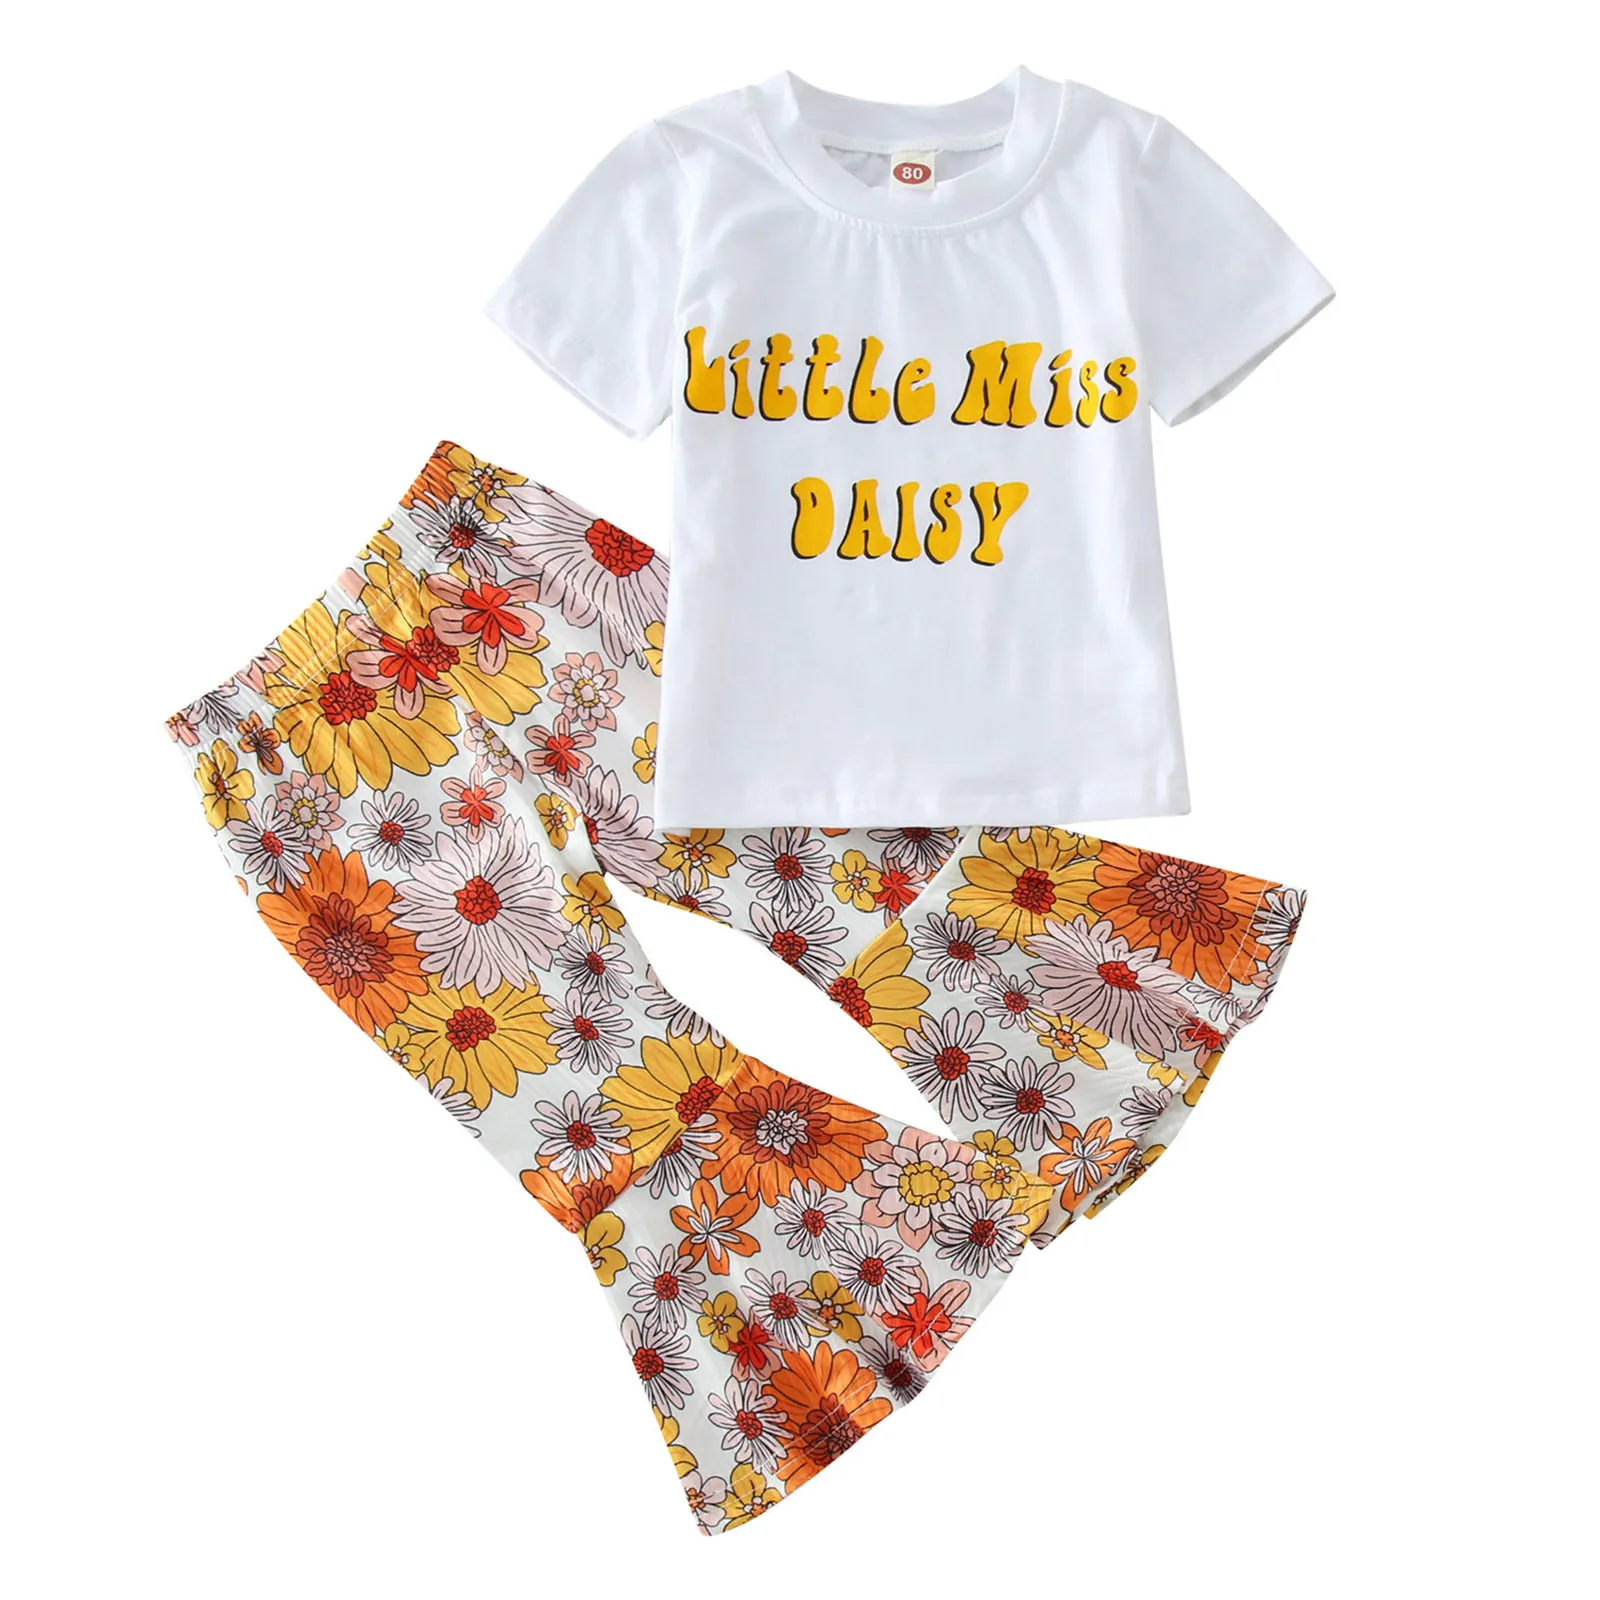 Miwear Little Girls Fly Sleeve T-Shirt Top Sunflower Flare Pants Outfits Set